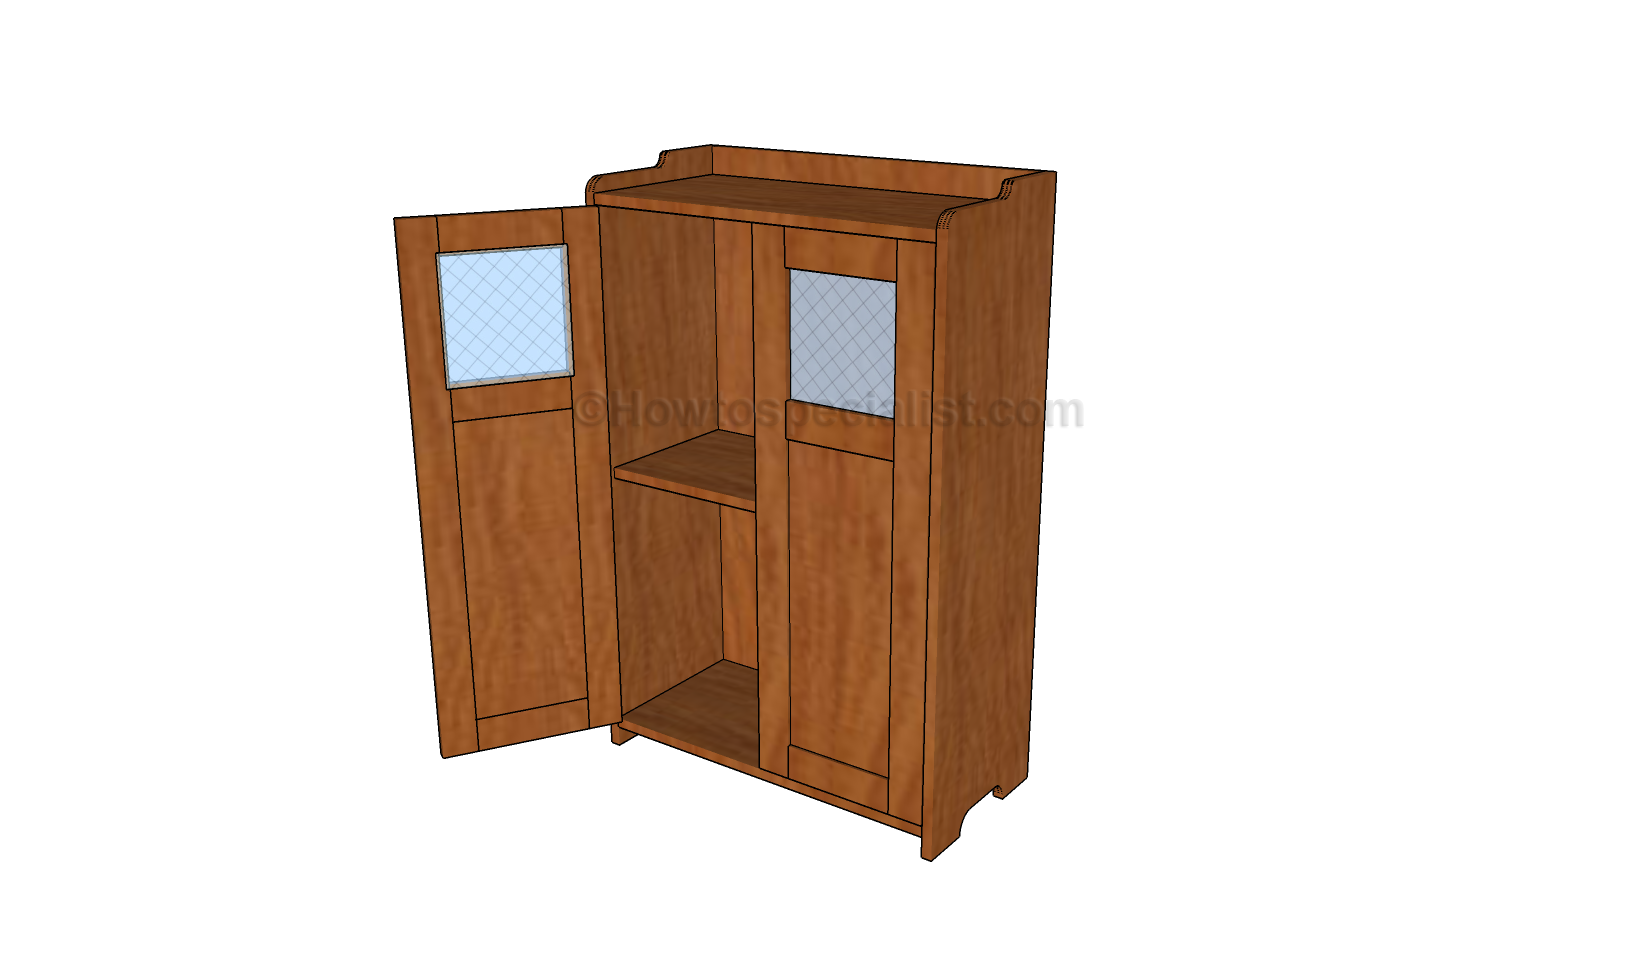 Wood cabinet plans | HowToSpecialist - How to Build, Step by Step DIY 